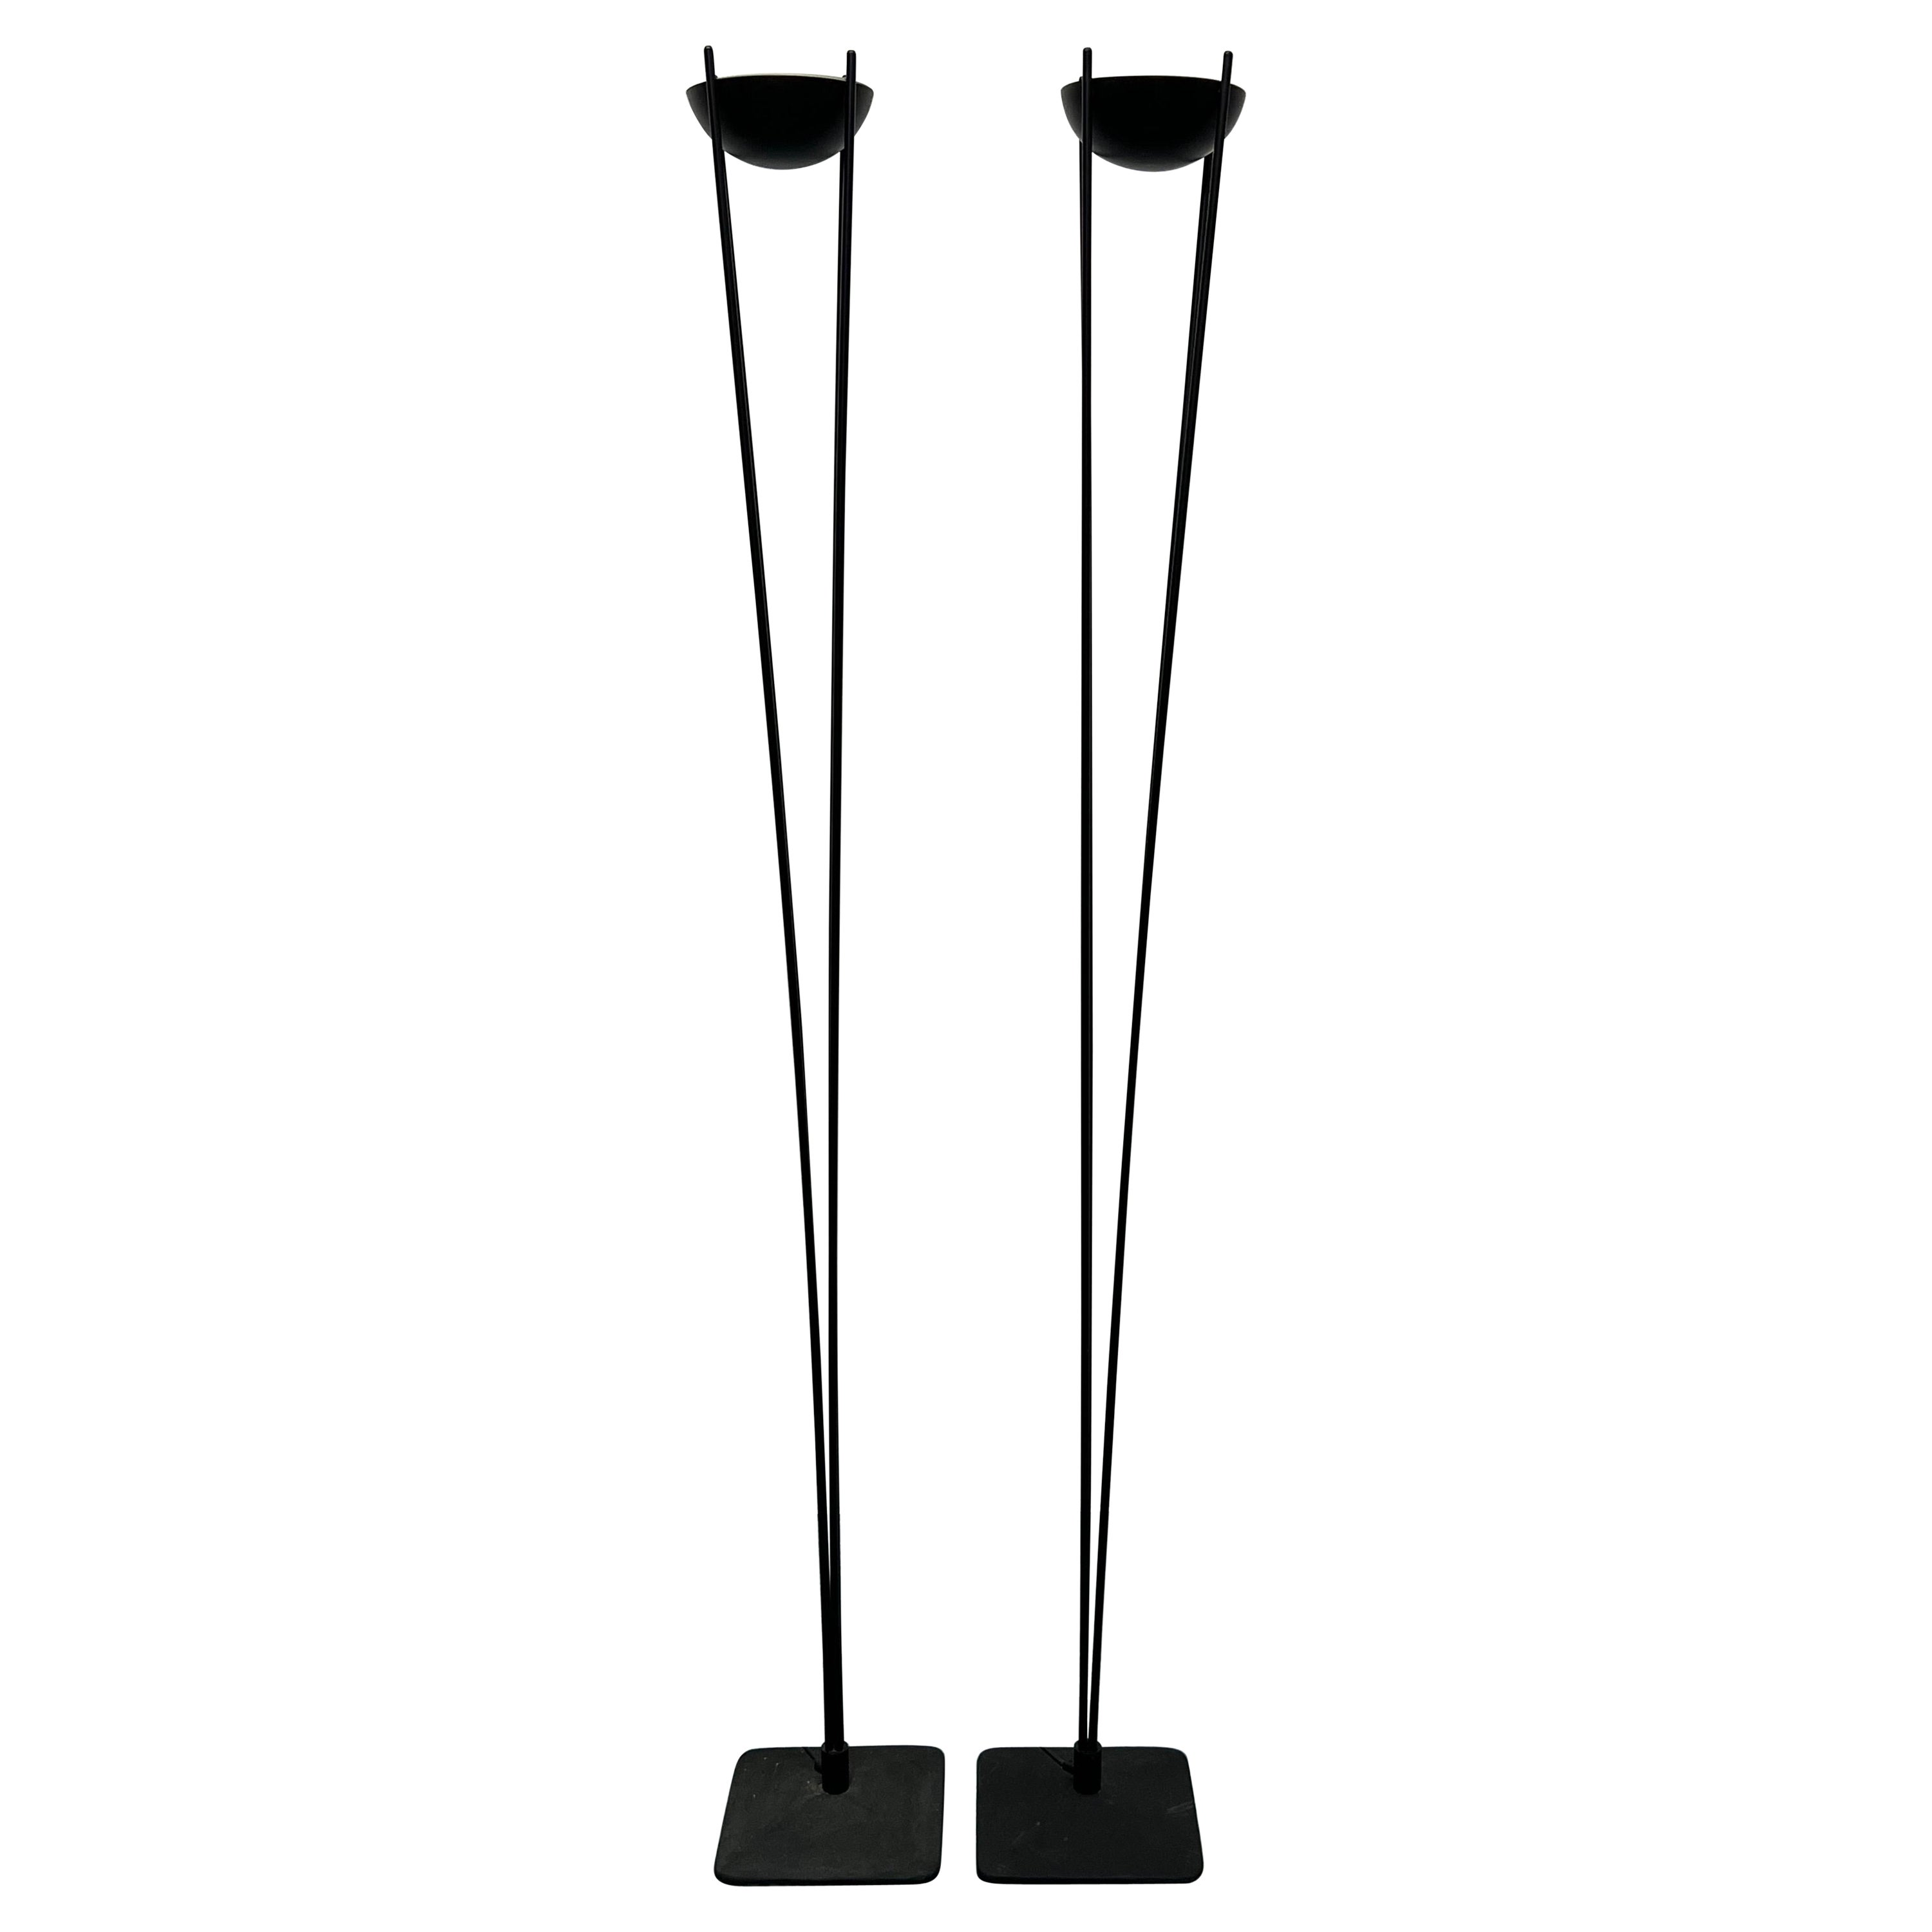 Postmodern Koch & Lowy Matte Black Torchiere Floor Lamps, 1980s, a Pair For Sale